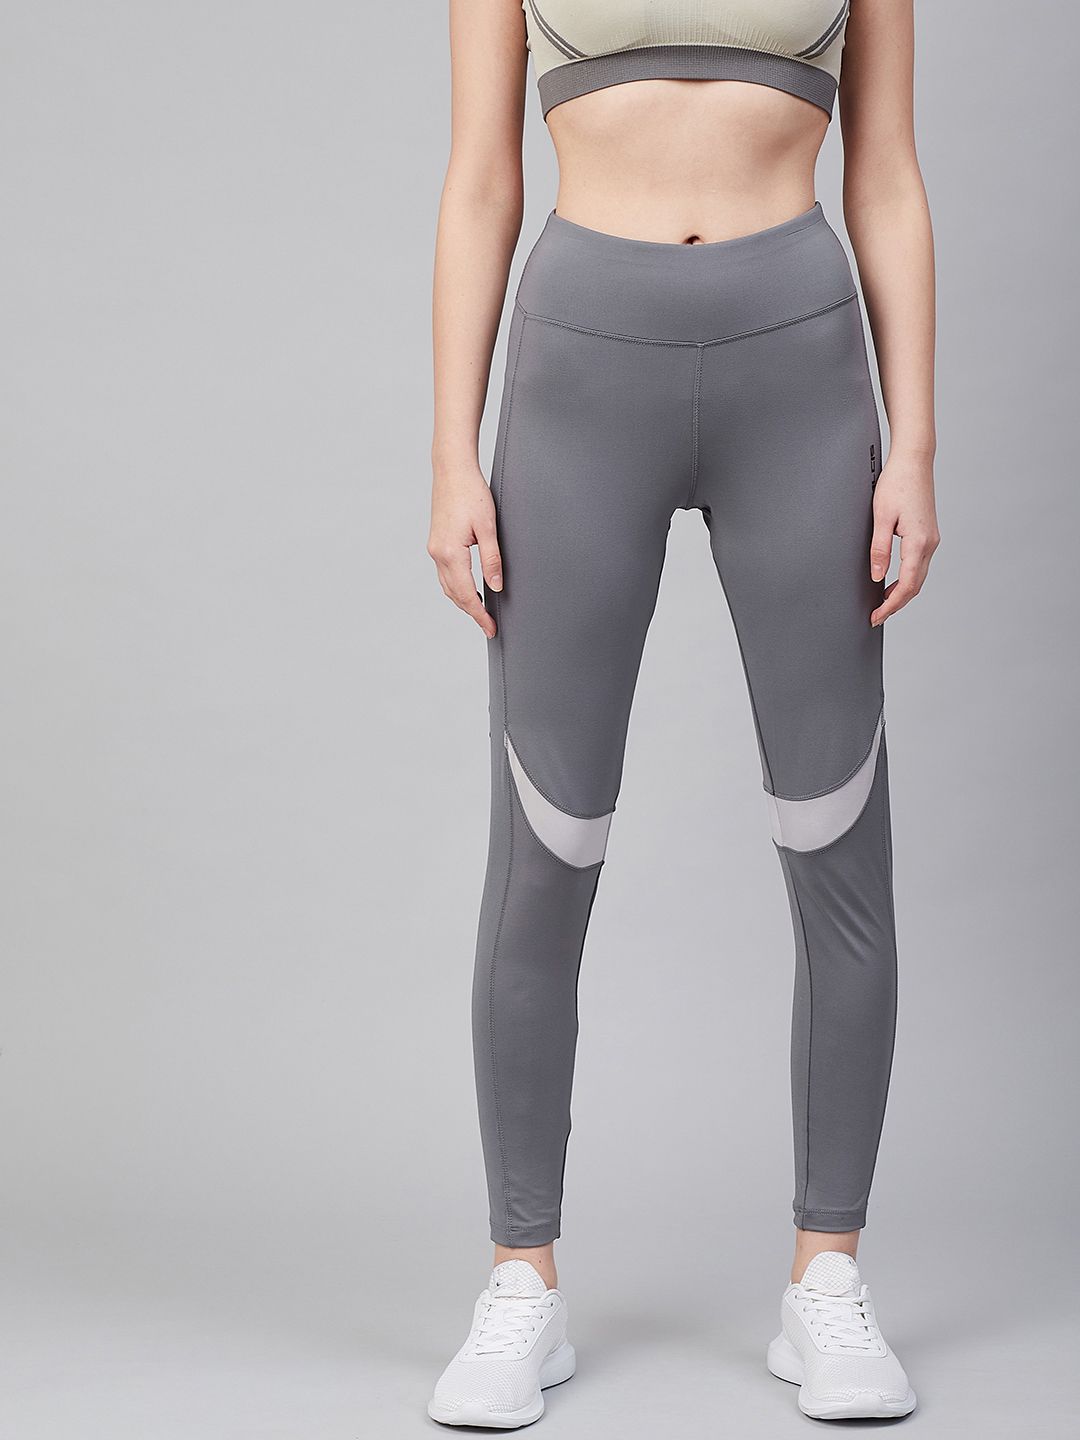 Alcis Women Grey Solid Training Tights Price in India